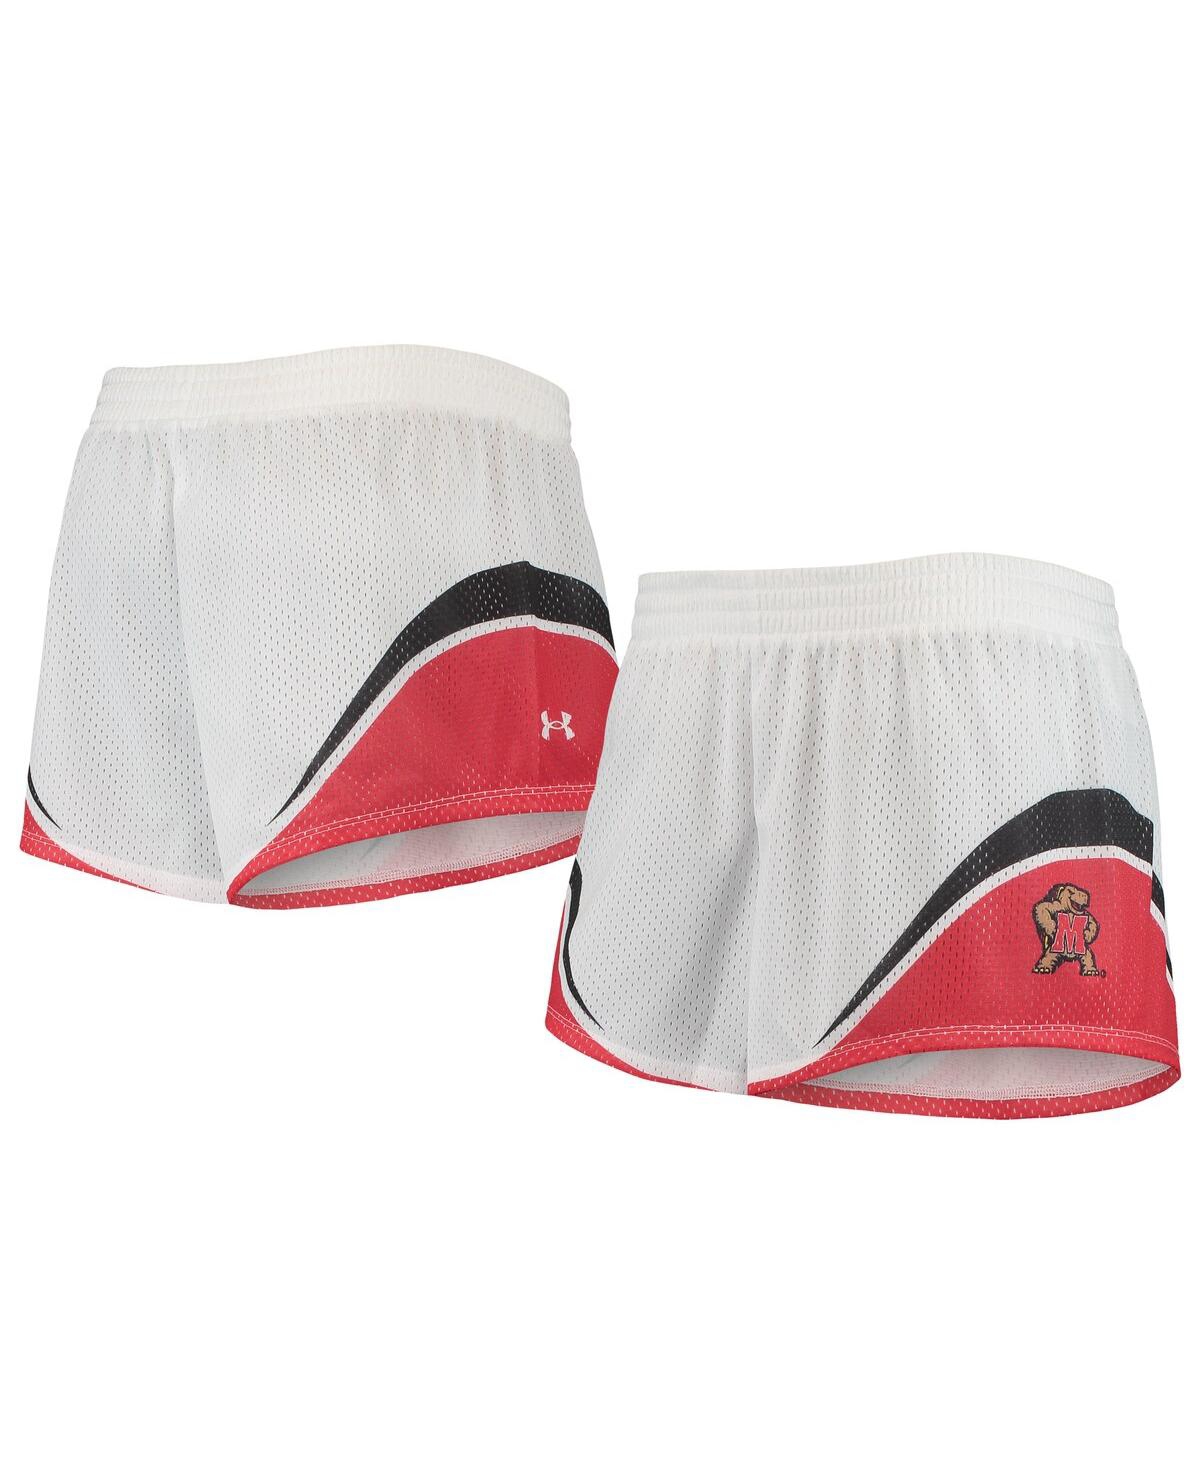 UNDER ARMOUR WOMEN'S UNDER ARMOUR WHITE AND RED MARYLAND TERRAPINS MESH SHORTS